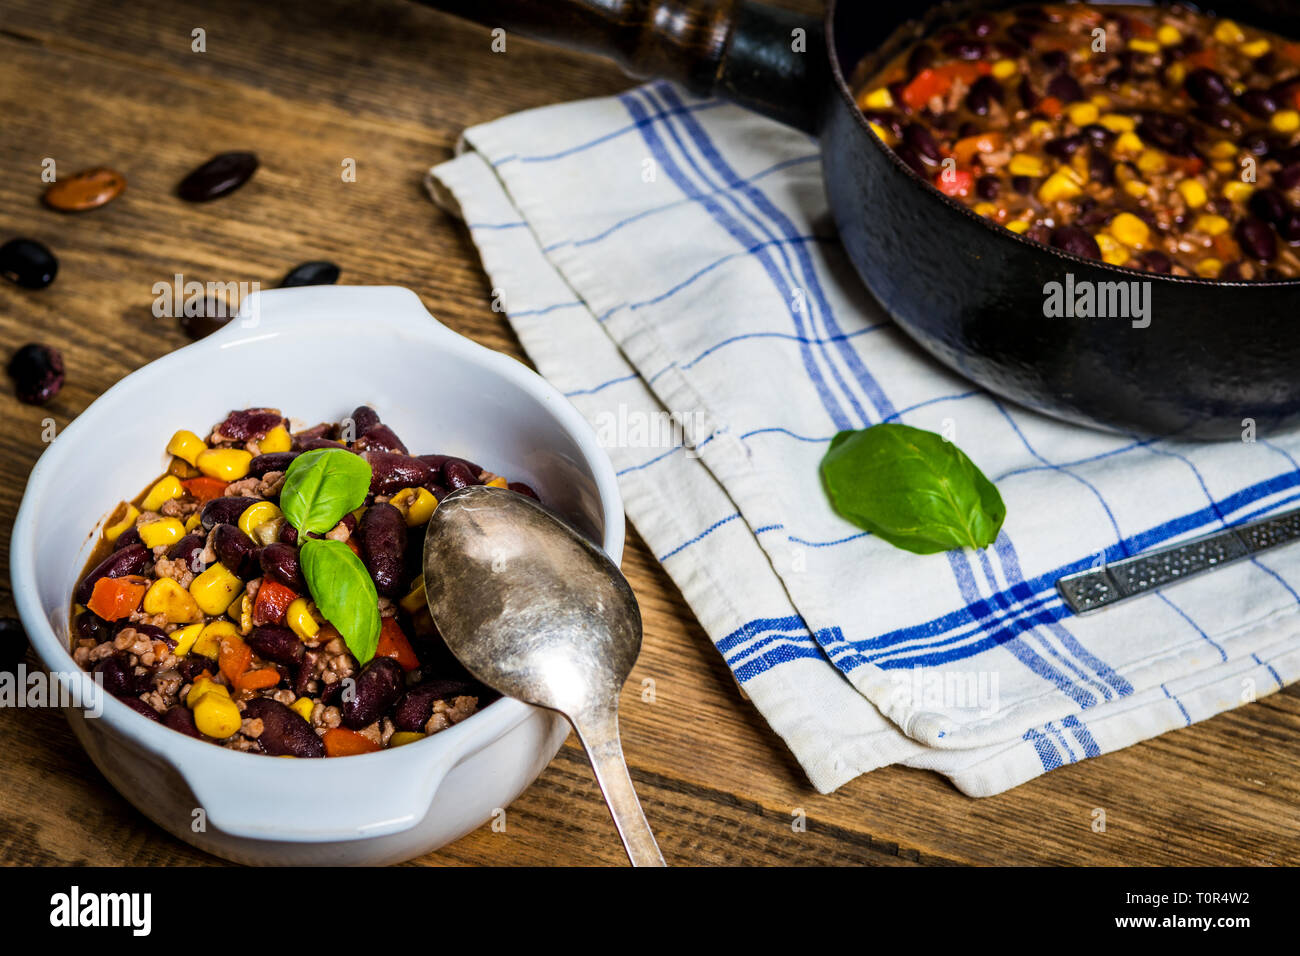 Chili or chilli corn carne. Cooked kidney bean, minced meat, chili, corn and pepper in white bowl  on wood table Stock Photo